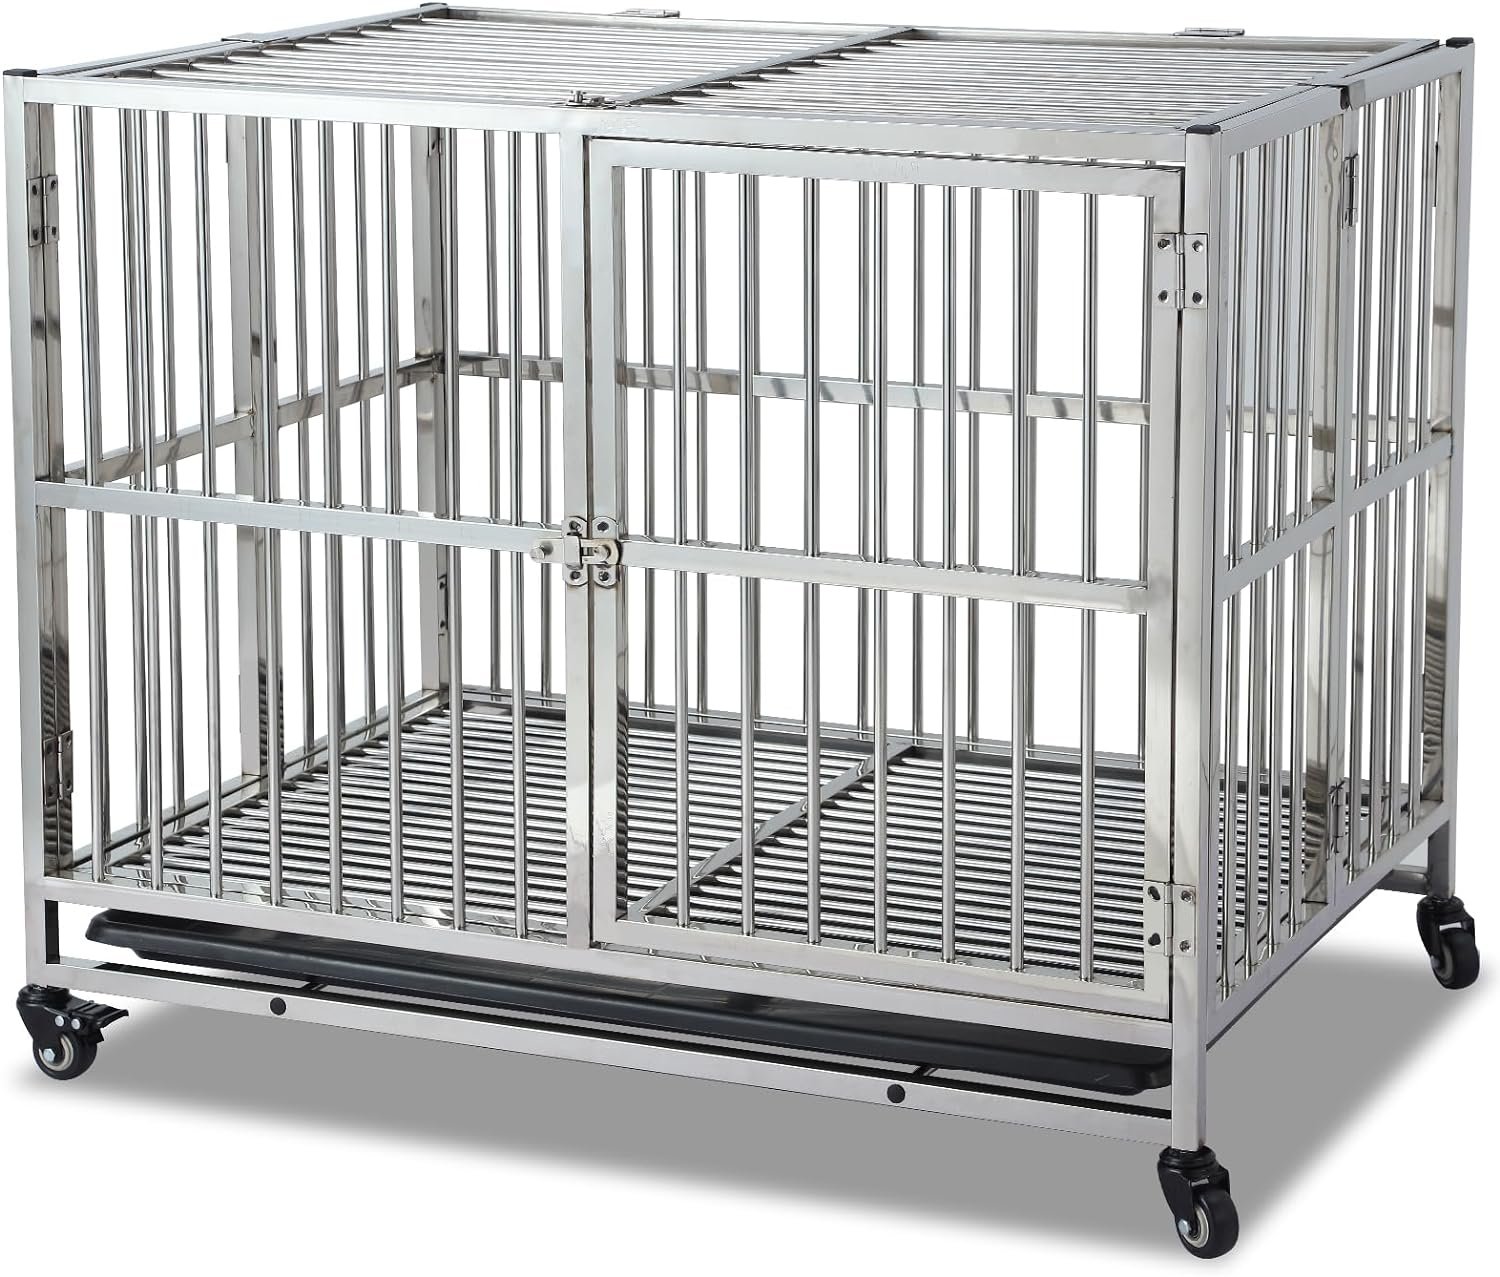 38 heavy duty indestructible dog crate steel escape proof dog cage kennel for small medium large dogs indoor double door